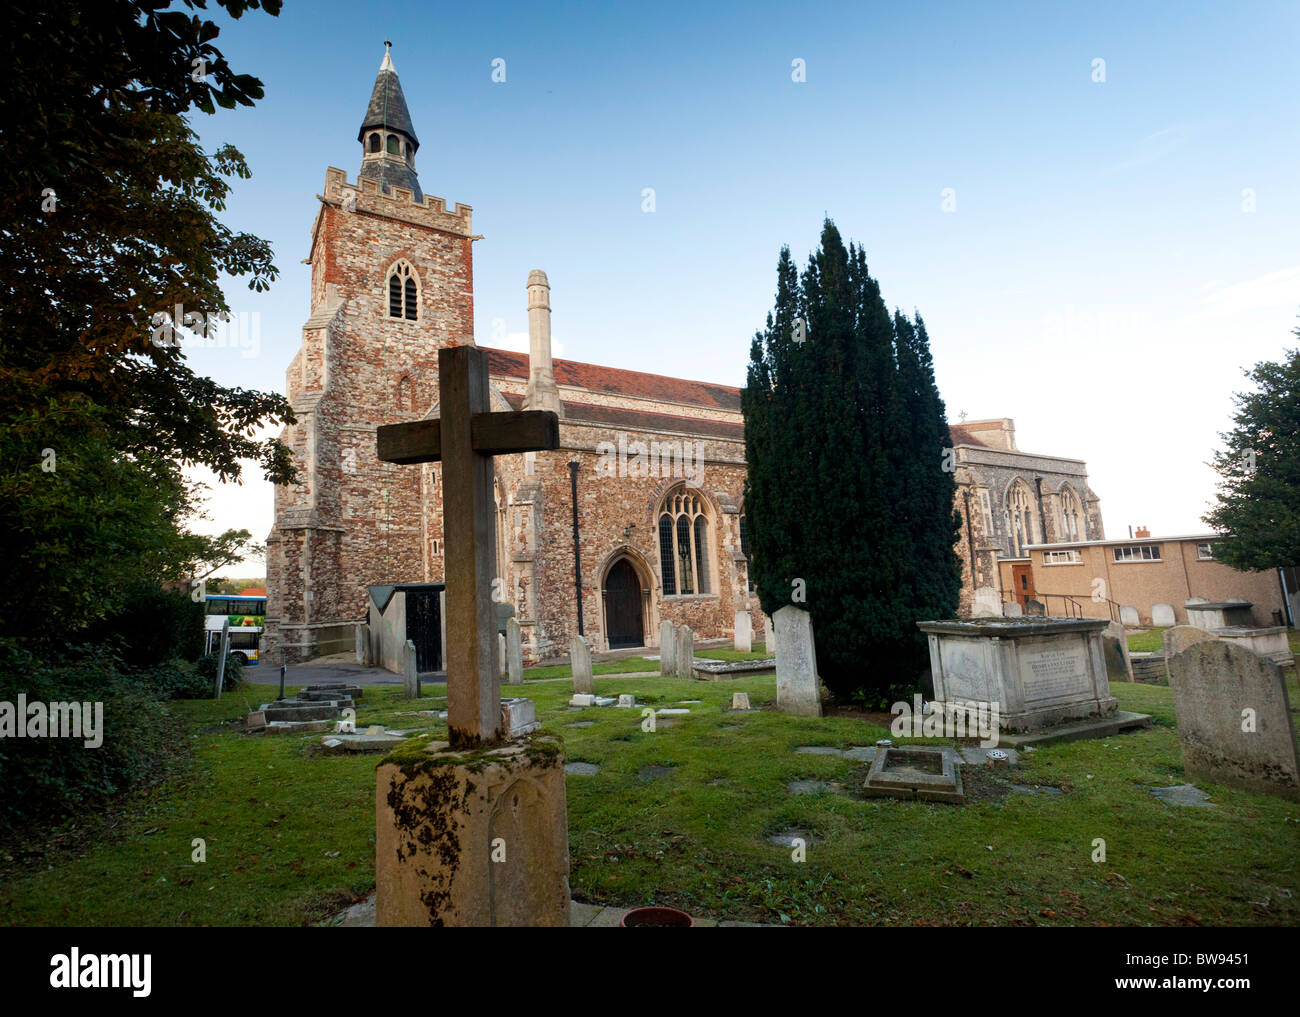 St James The Great church in Colchester, UK Stock Photo